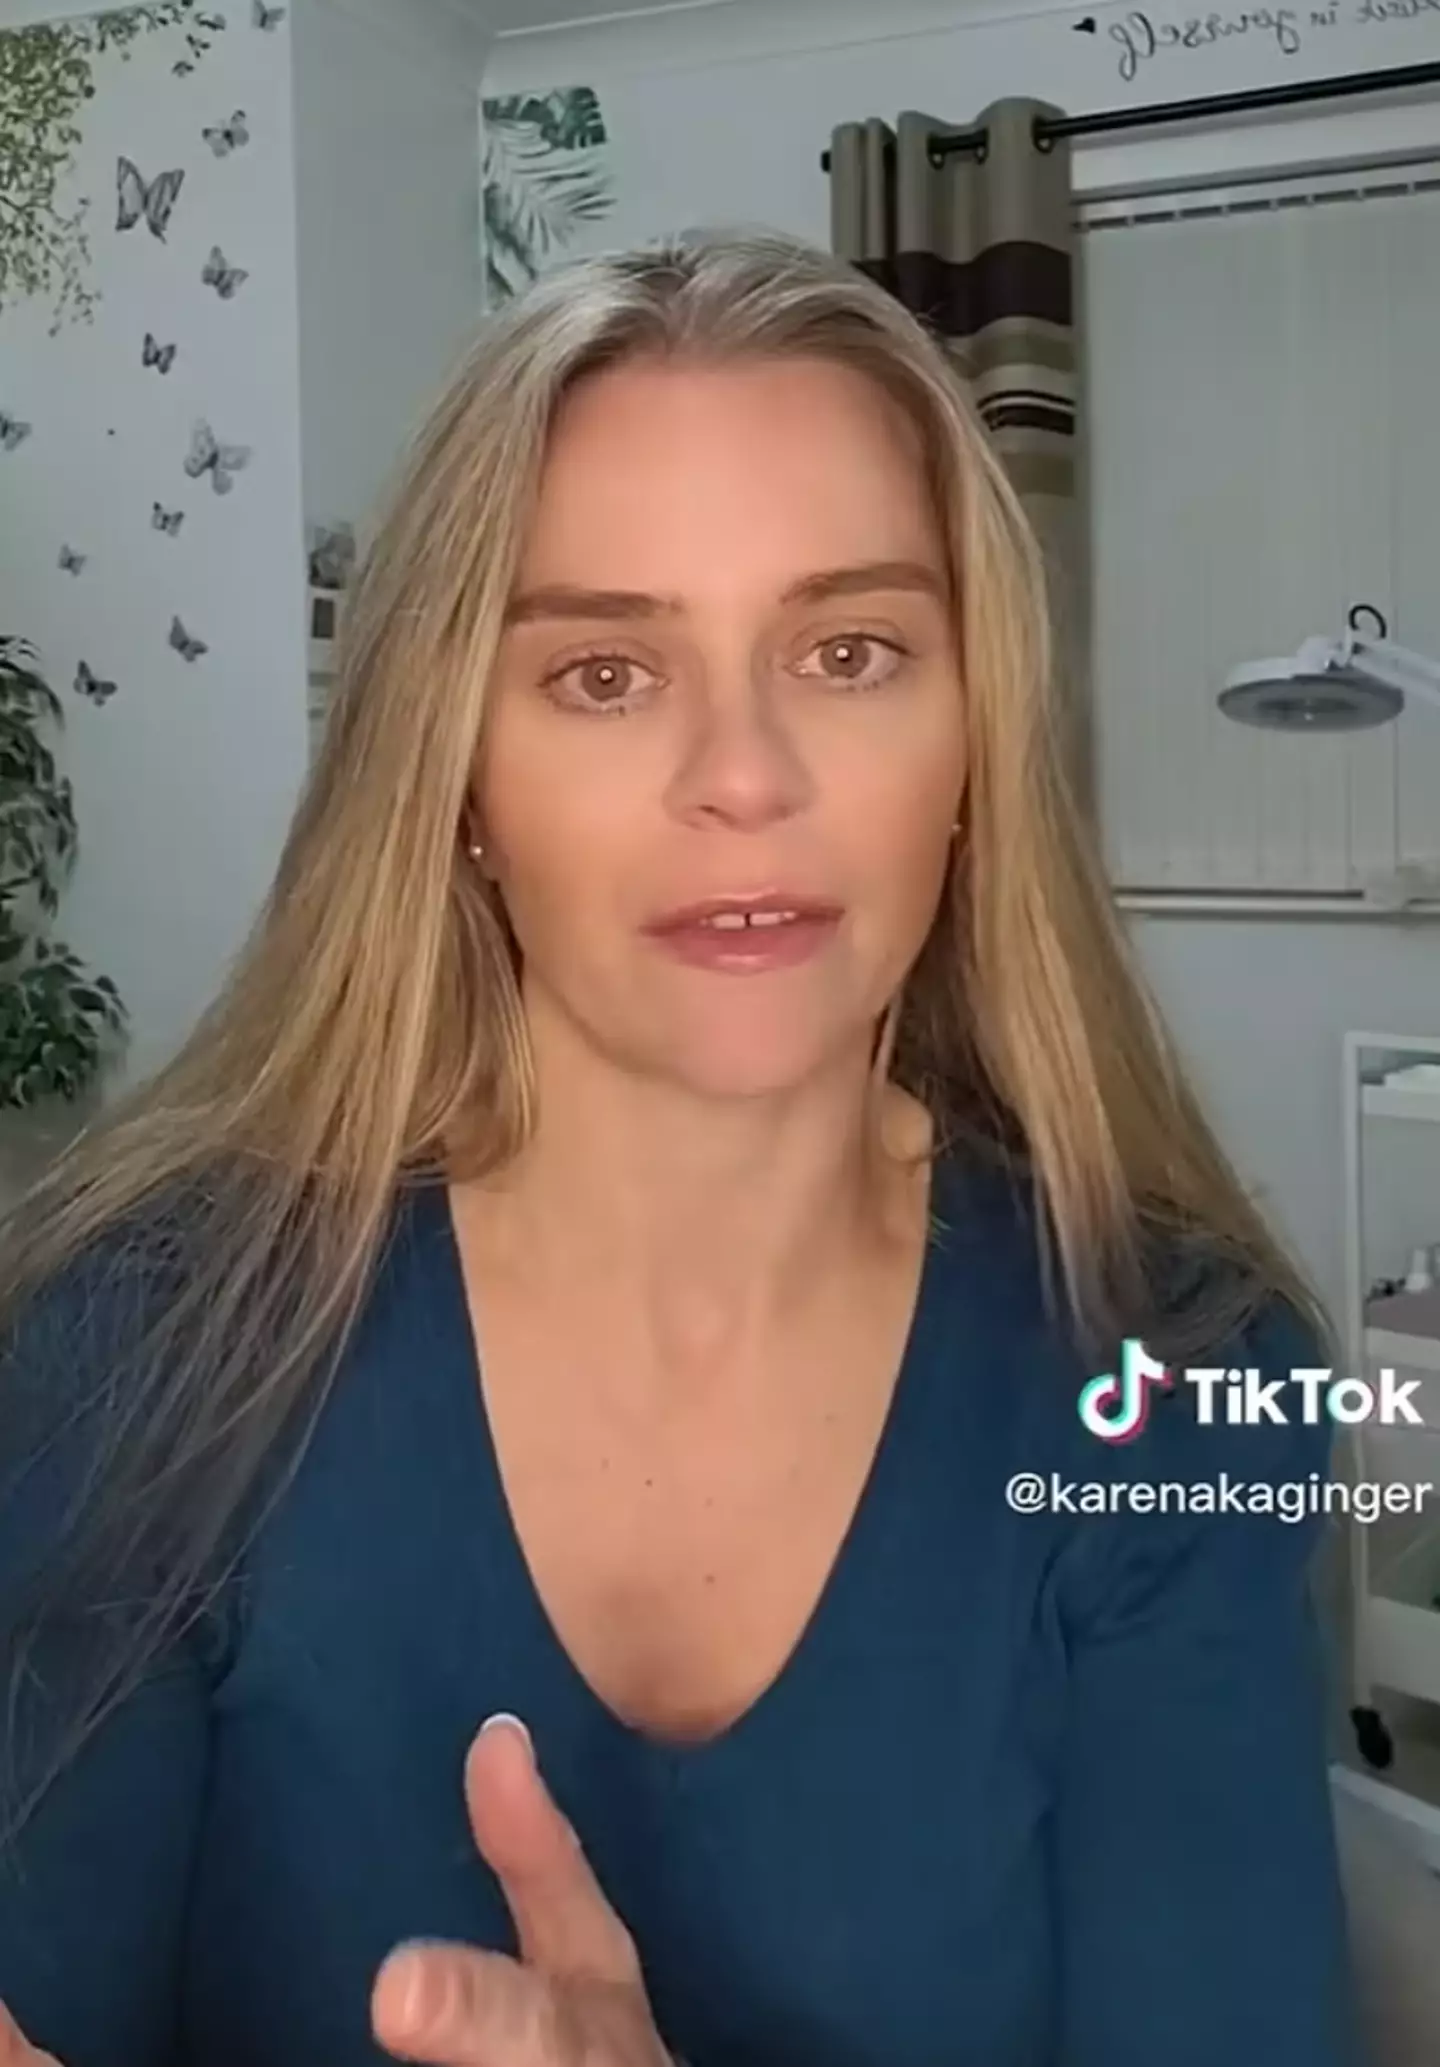 The mum sparked quite the debate on TikTok after revealing she splashes out around £700 each on her kids.